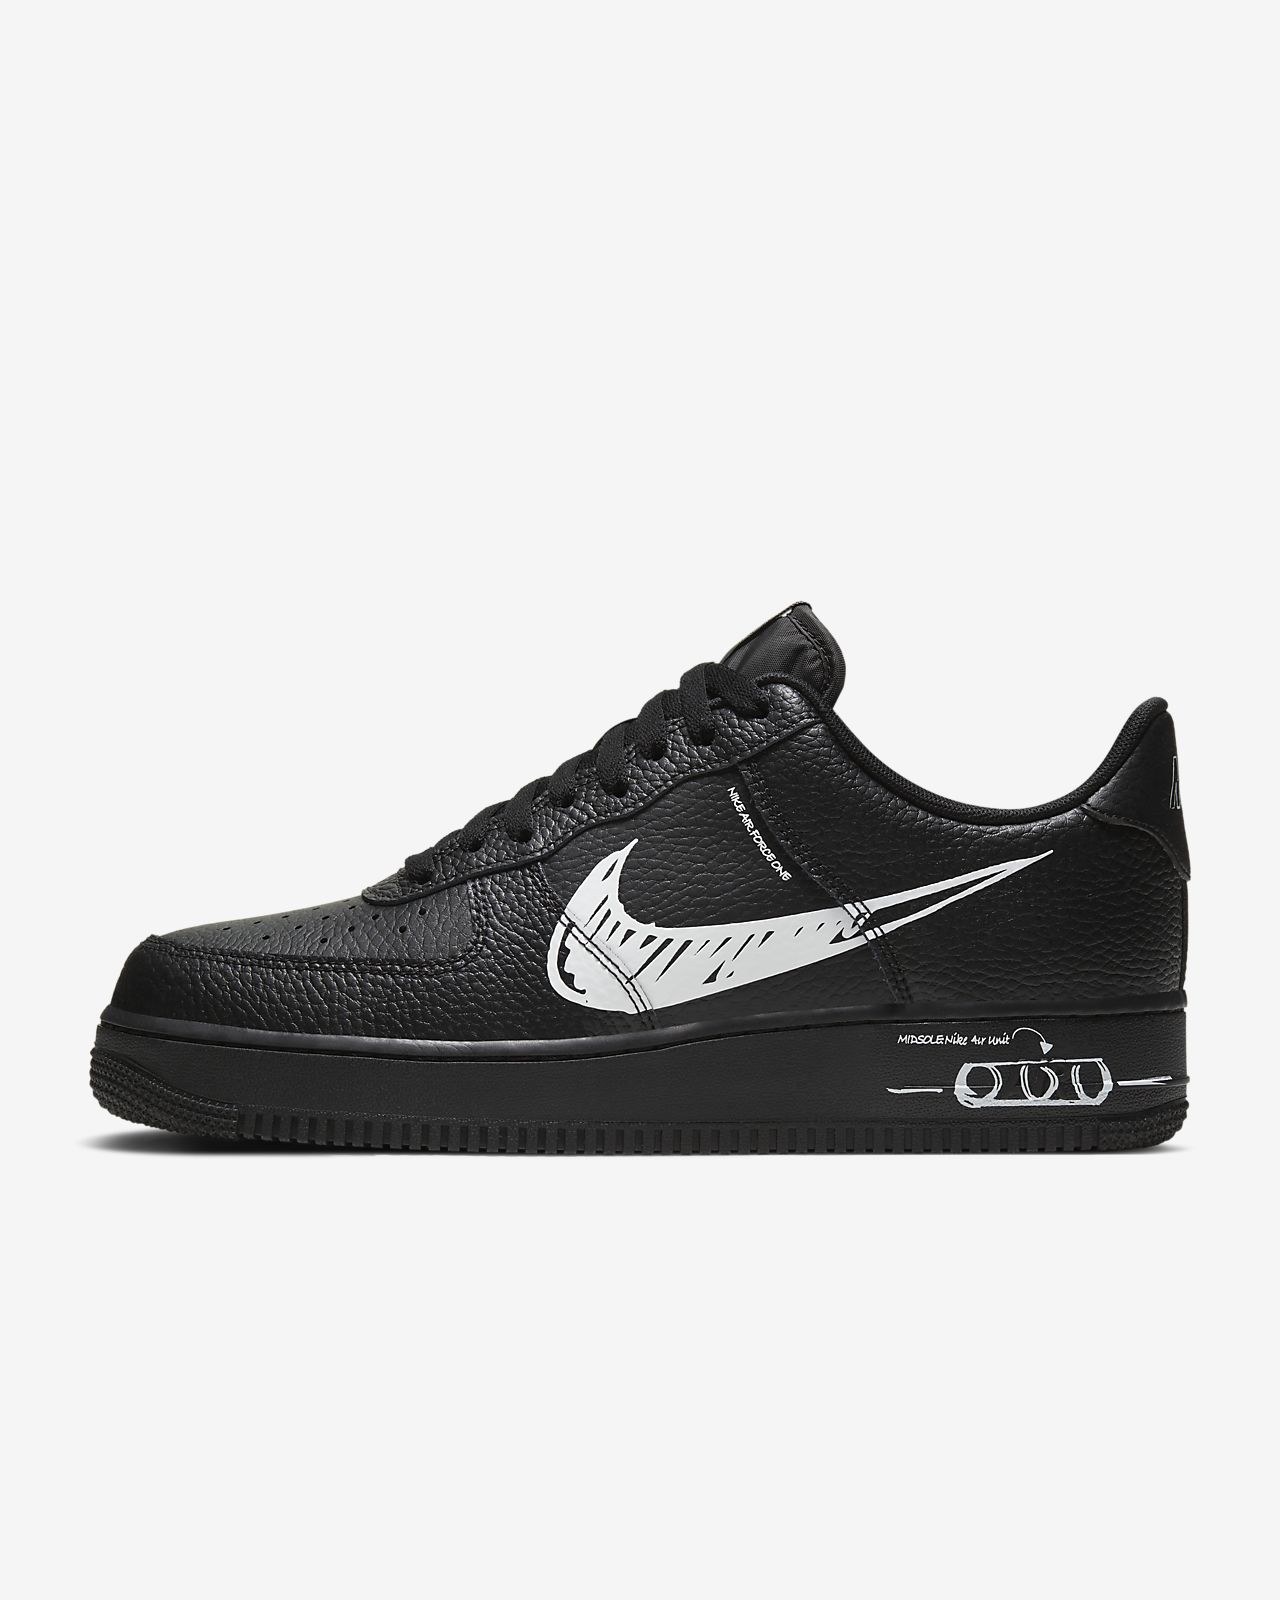 air force ones lv8 utility